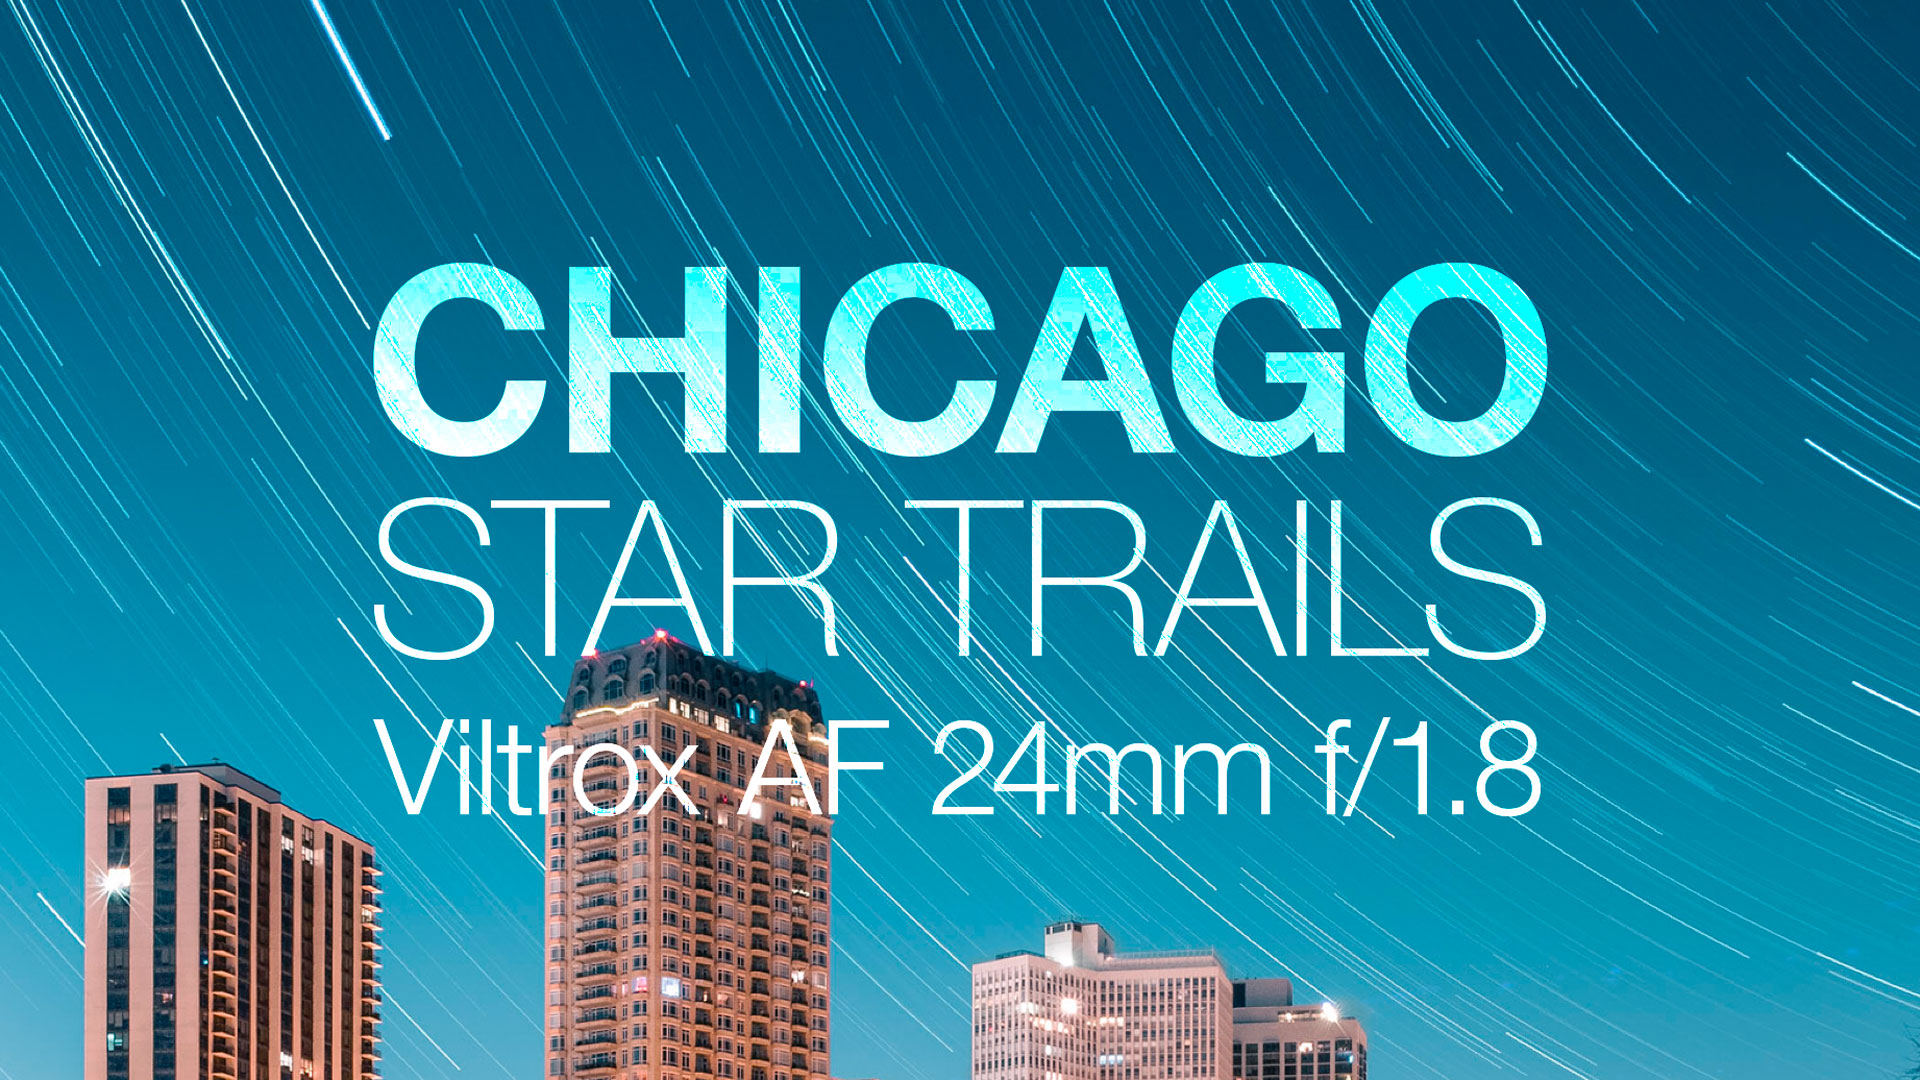 Chicago Star Trails with the Viltrox AF 24mm f/1.8